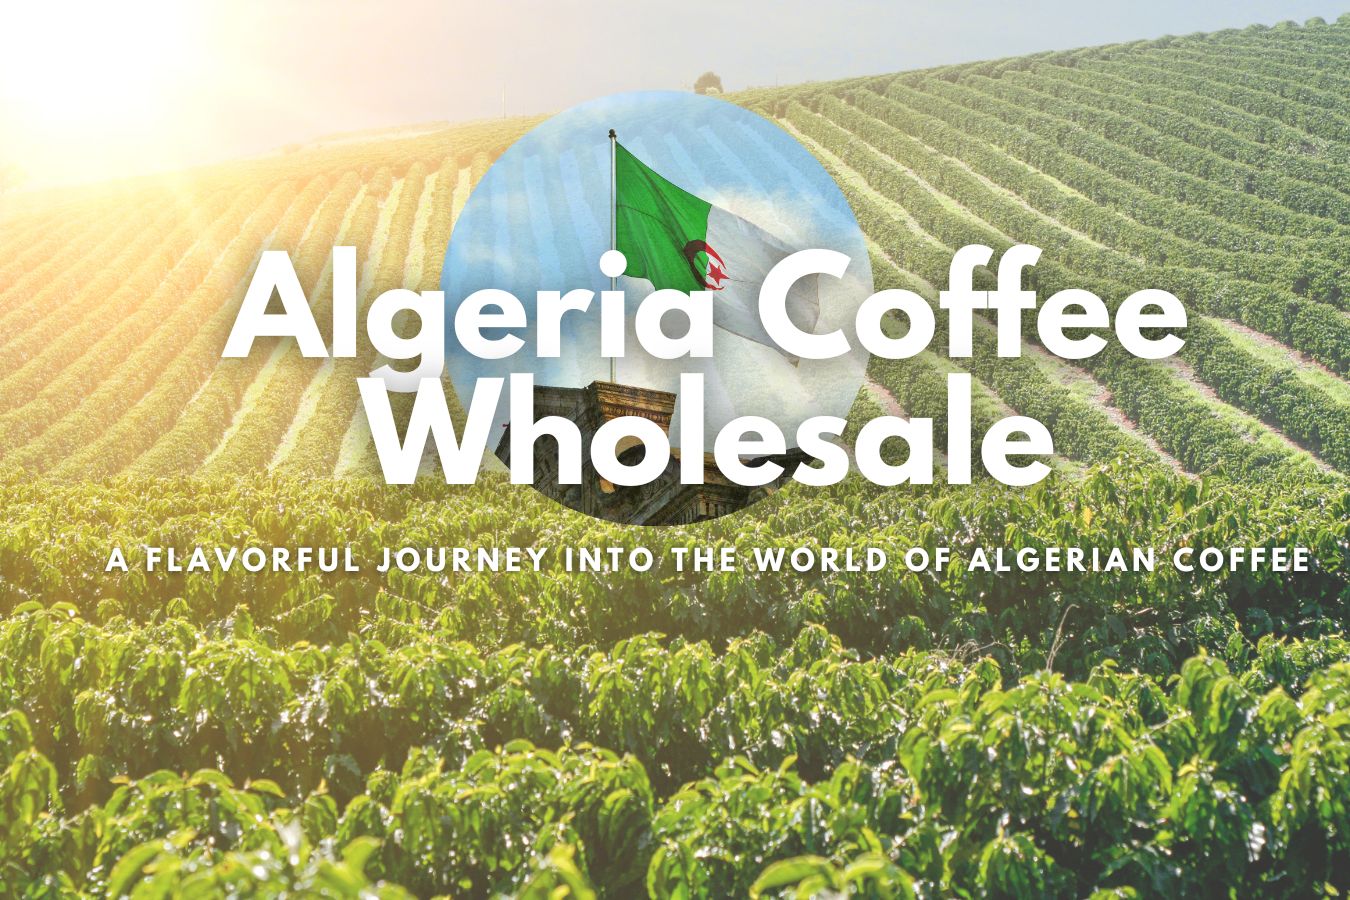 Algeria Coffee Wholesale A Flavorful Journey into the World of Algerian Coffee